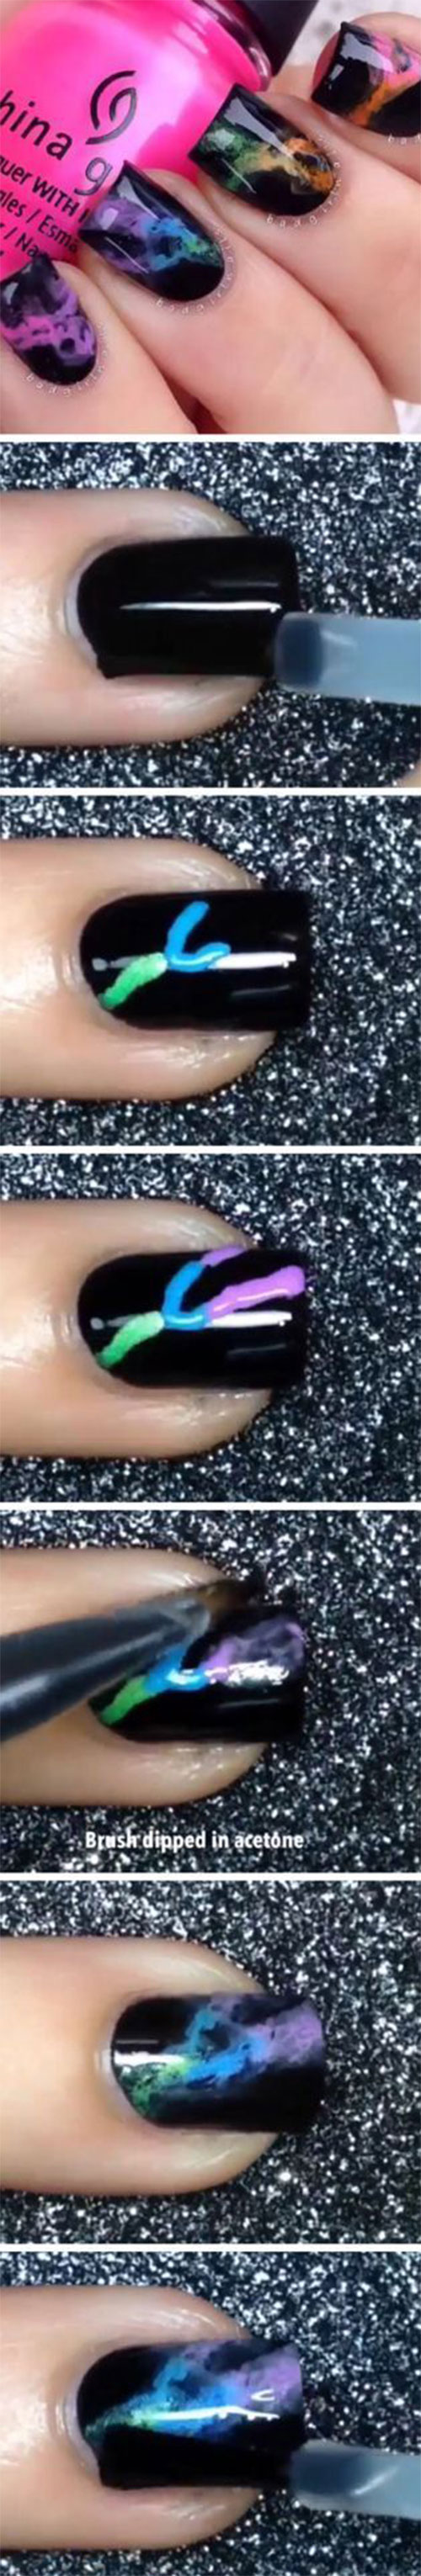 Easy-Step-By-Step-Marble-Nails-Art-Tutorials-For-Beginners-2017-9